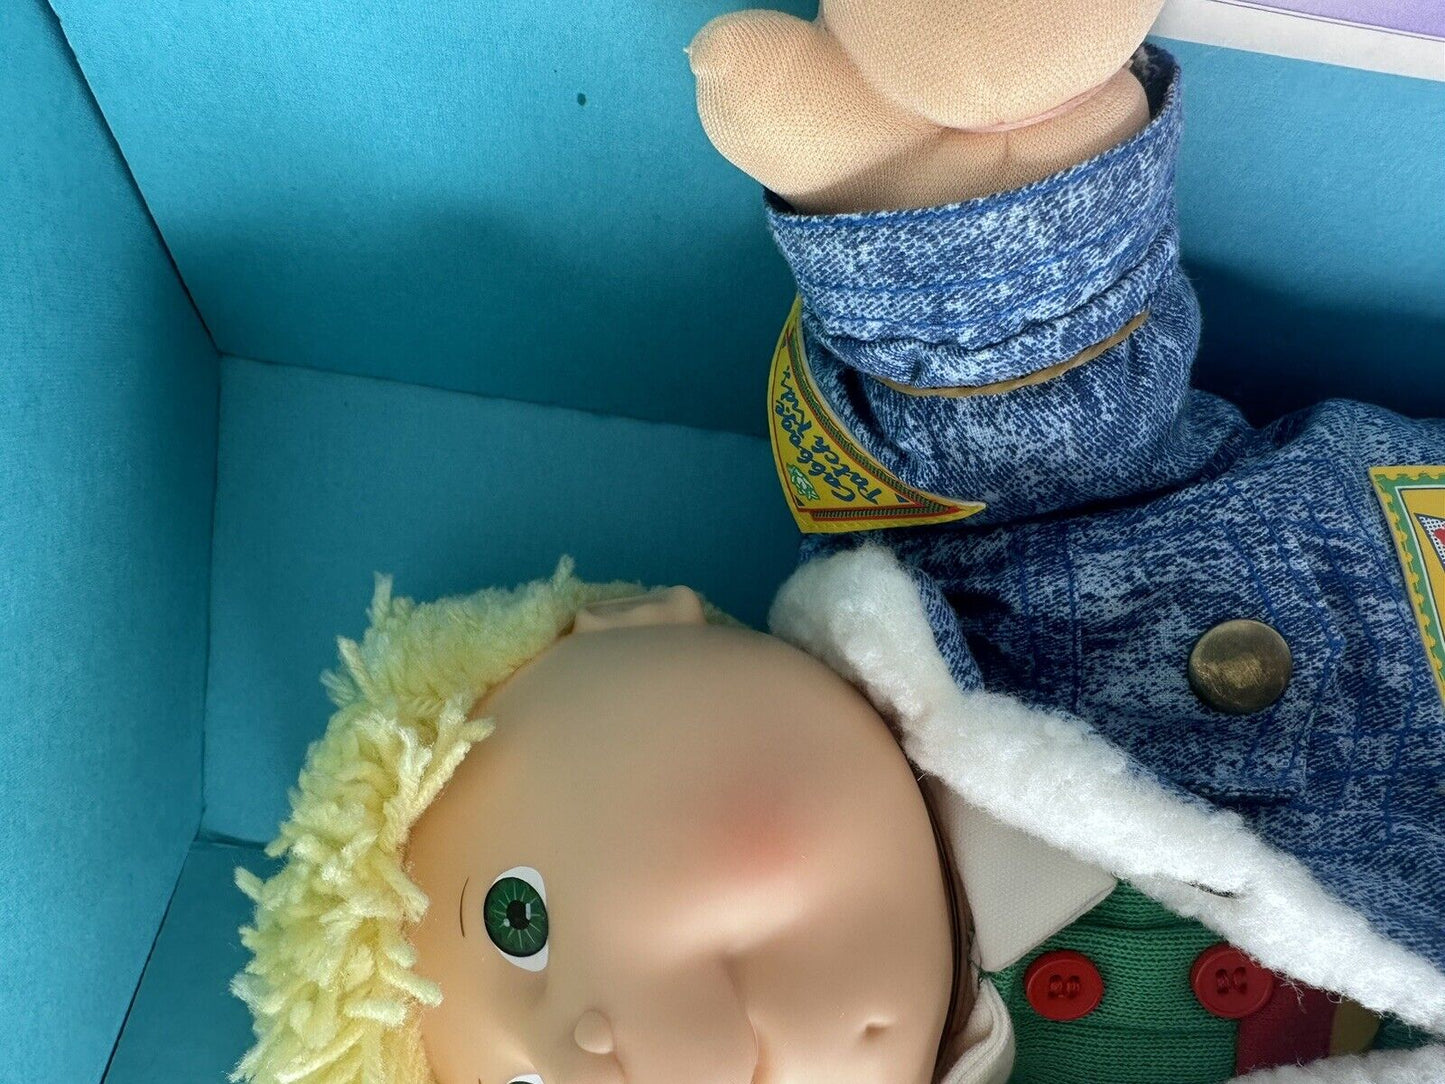 Rare 1989 Cabbage Patch Kids Arthur Brent - Blonde Hair, Blue Eyes, Full Original Outfit - Vintage Collectible Doll - TreasuTiques